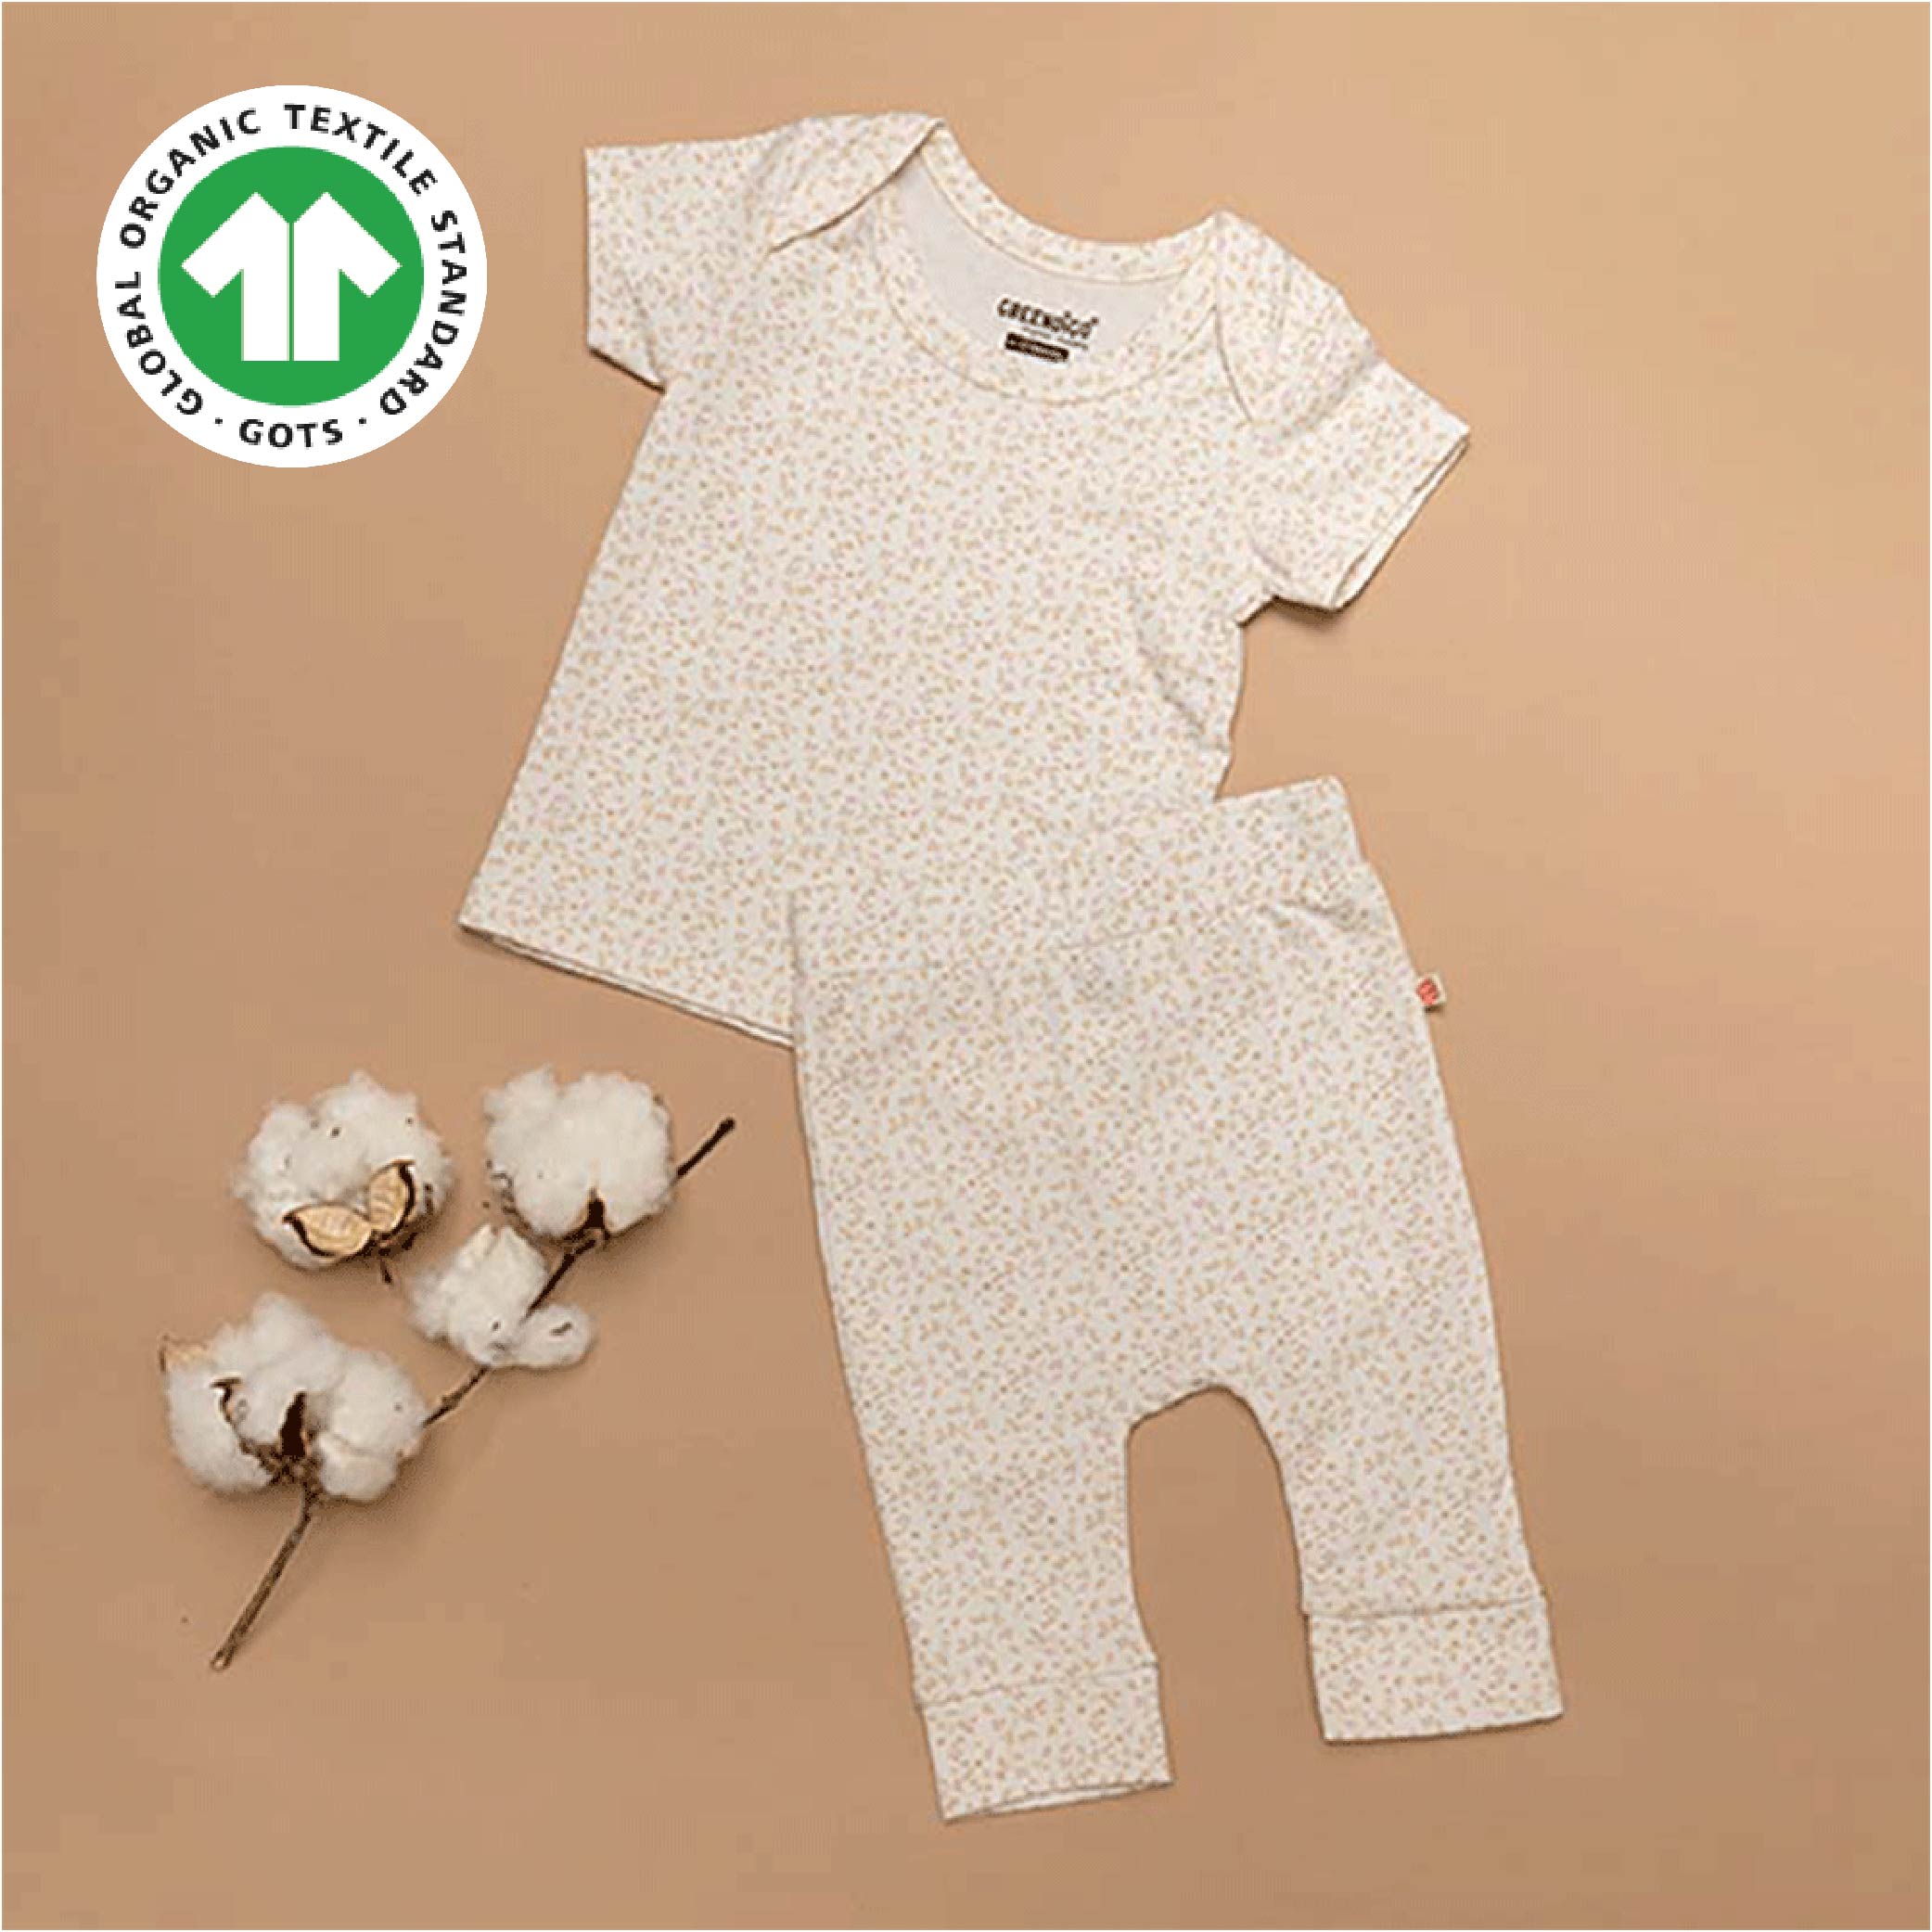 Greendigo 100% Organic Cotton Off White Printed Tshirt/Top And Pant For New Born Baby Boys And Baby Girls - Pack Of 2